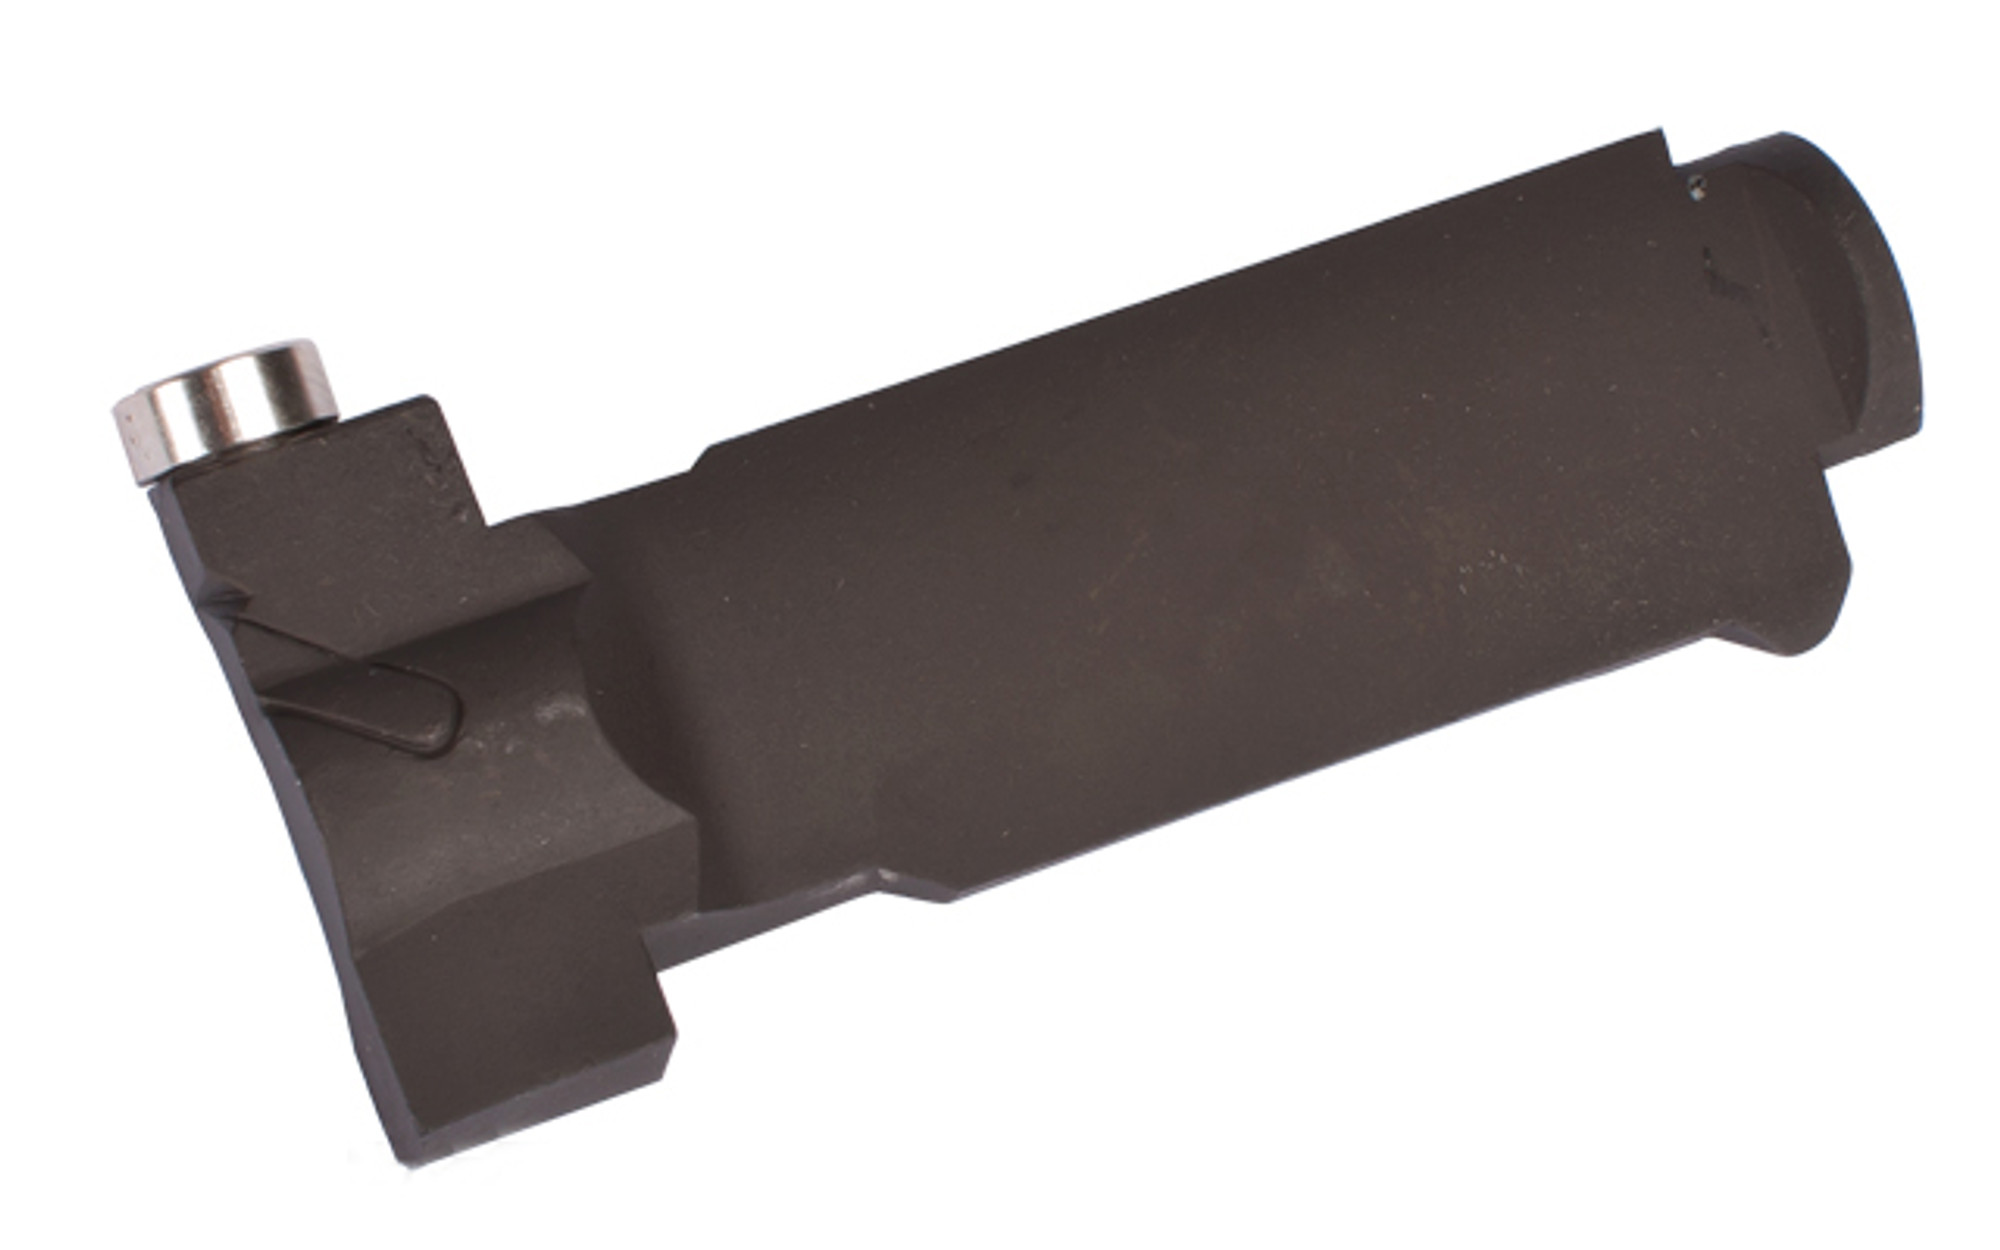 WE M14 Airsoft GBB Rifle Part #101 - Dust Cover